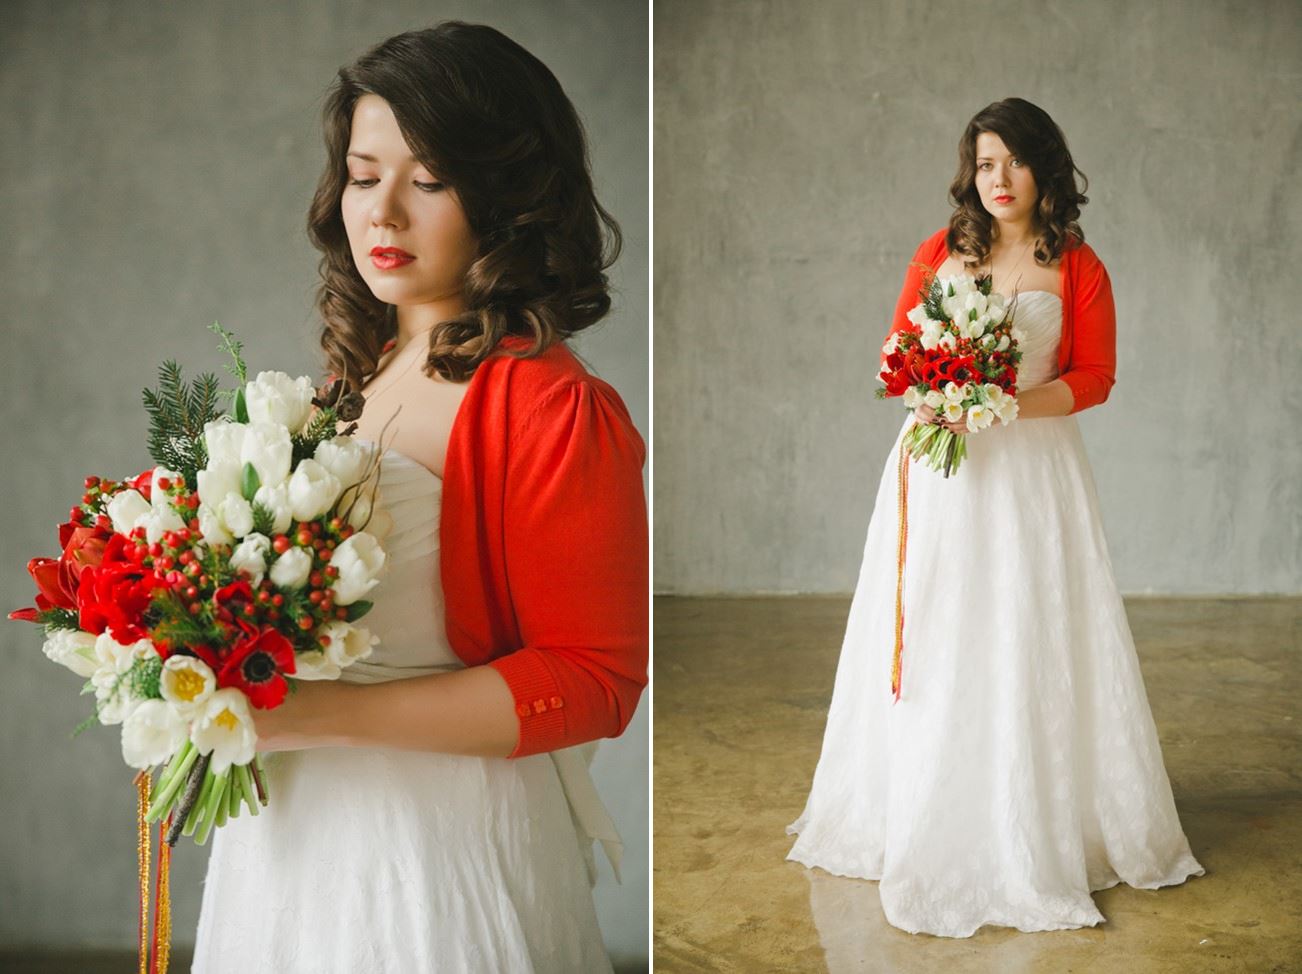 Christmas Wedding Dress - A Cosy Winter Wedding Inspiration Shoot in Red, Green & White from WarmPhoto